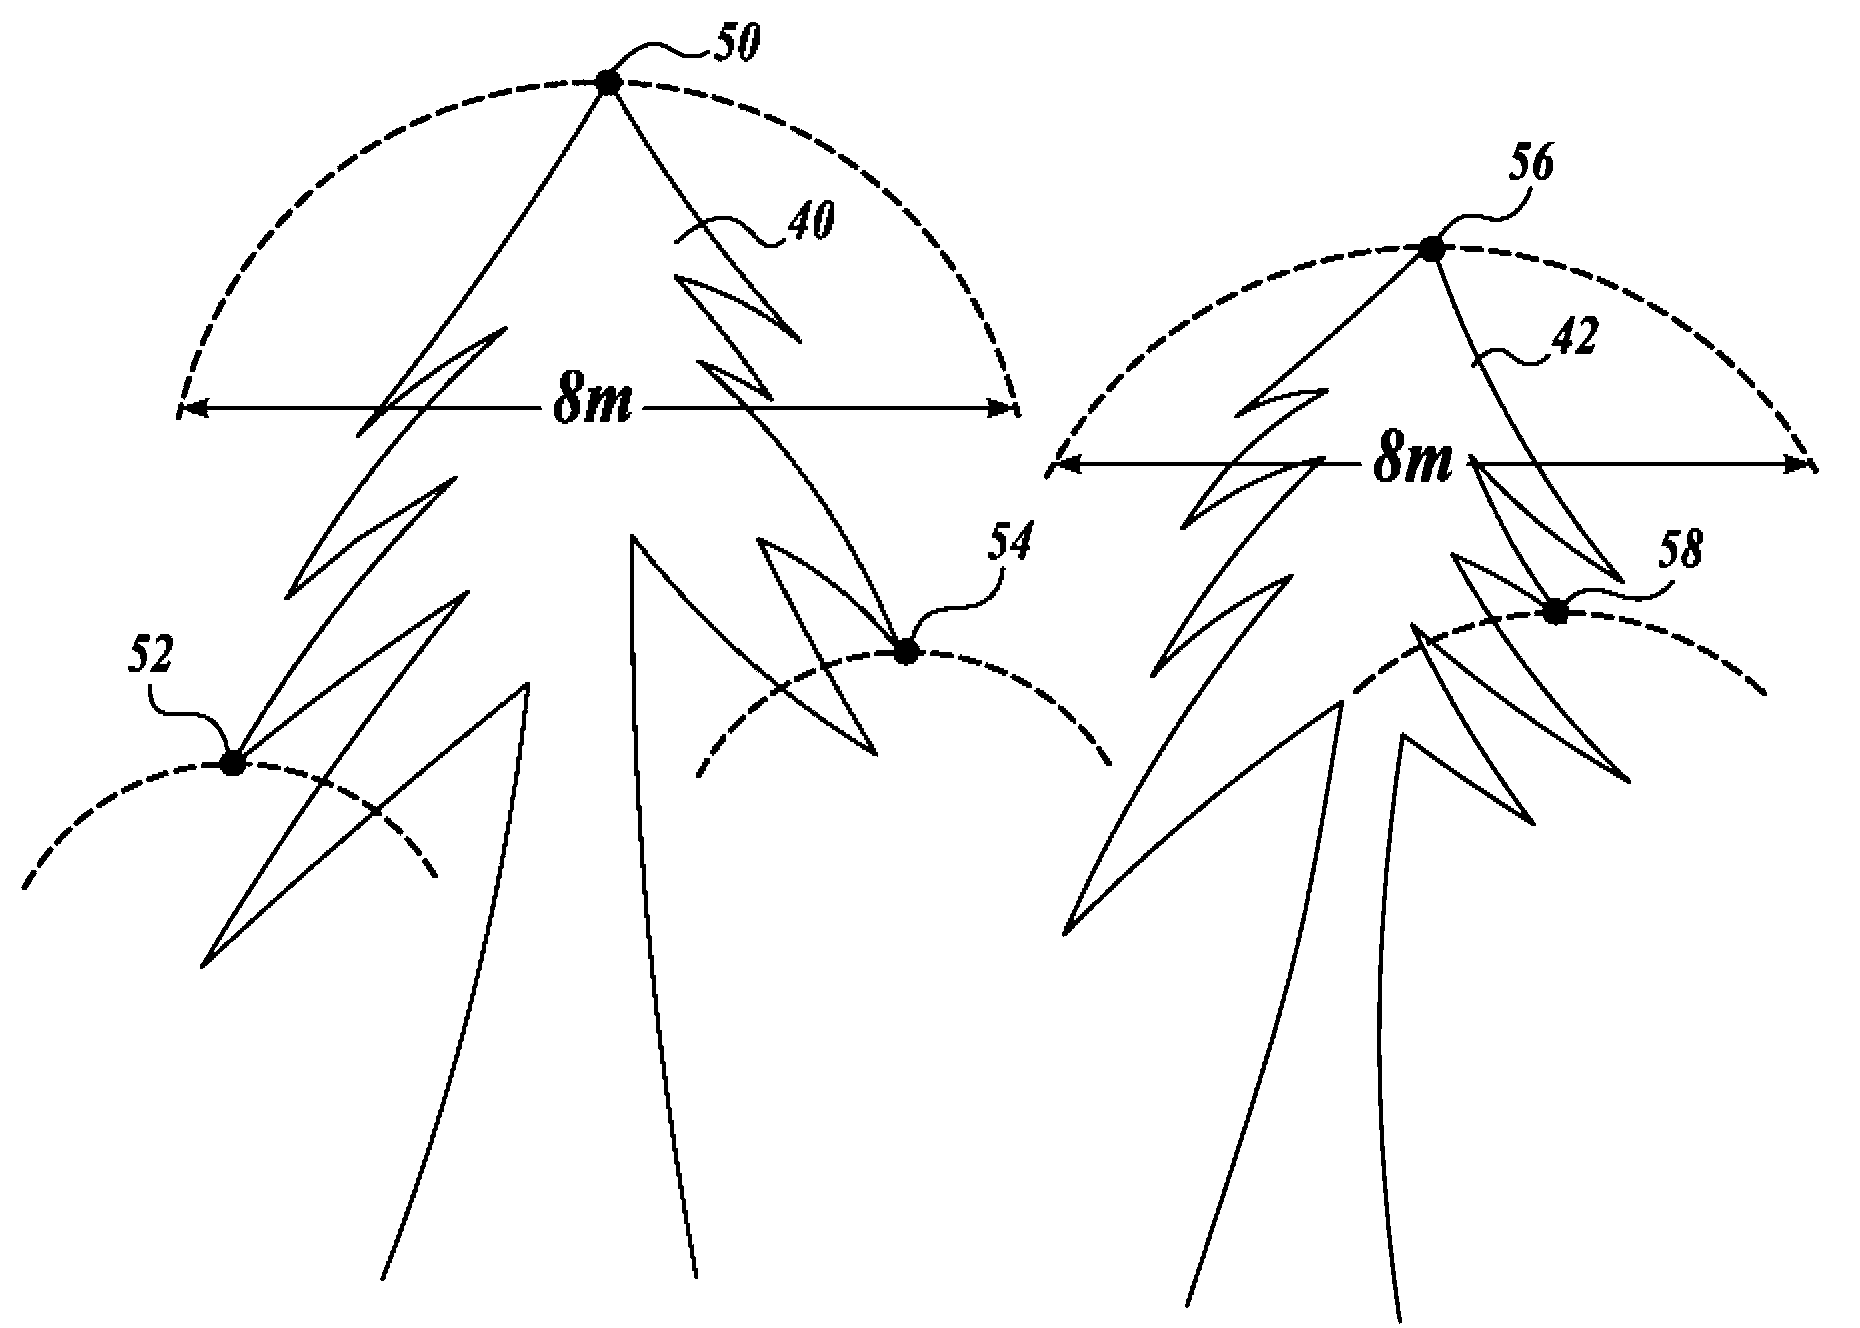 Method and apparatus for for analyzing tree canopies with LiDAR data